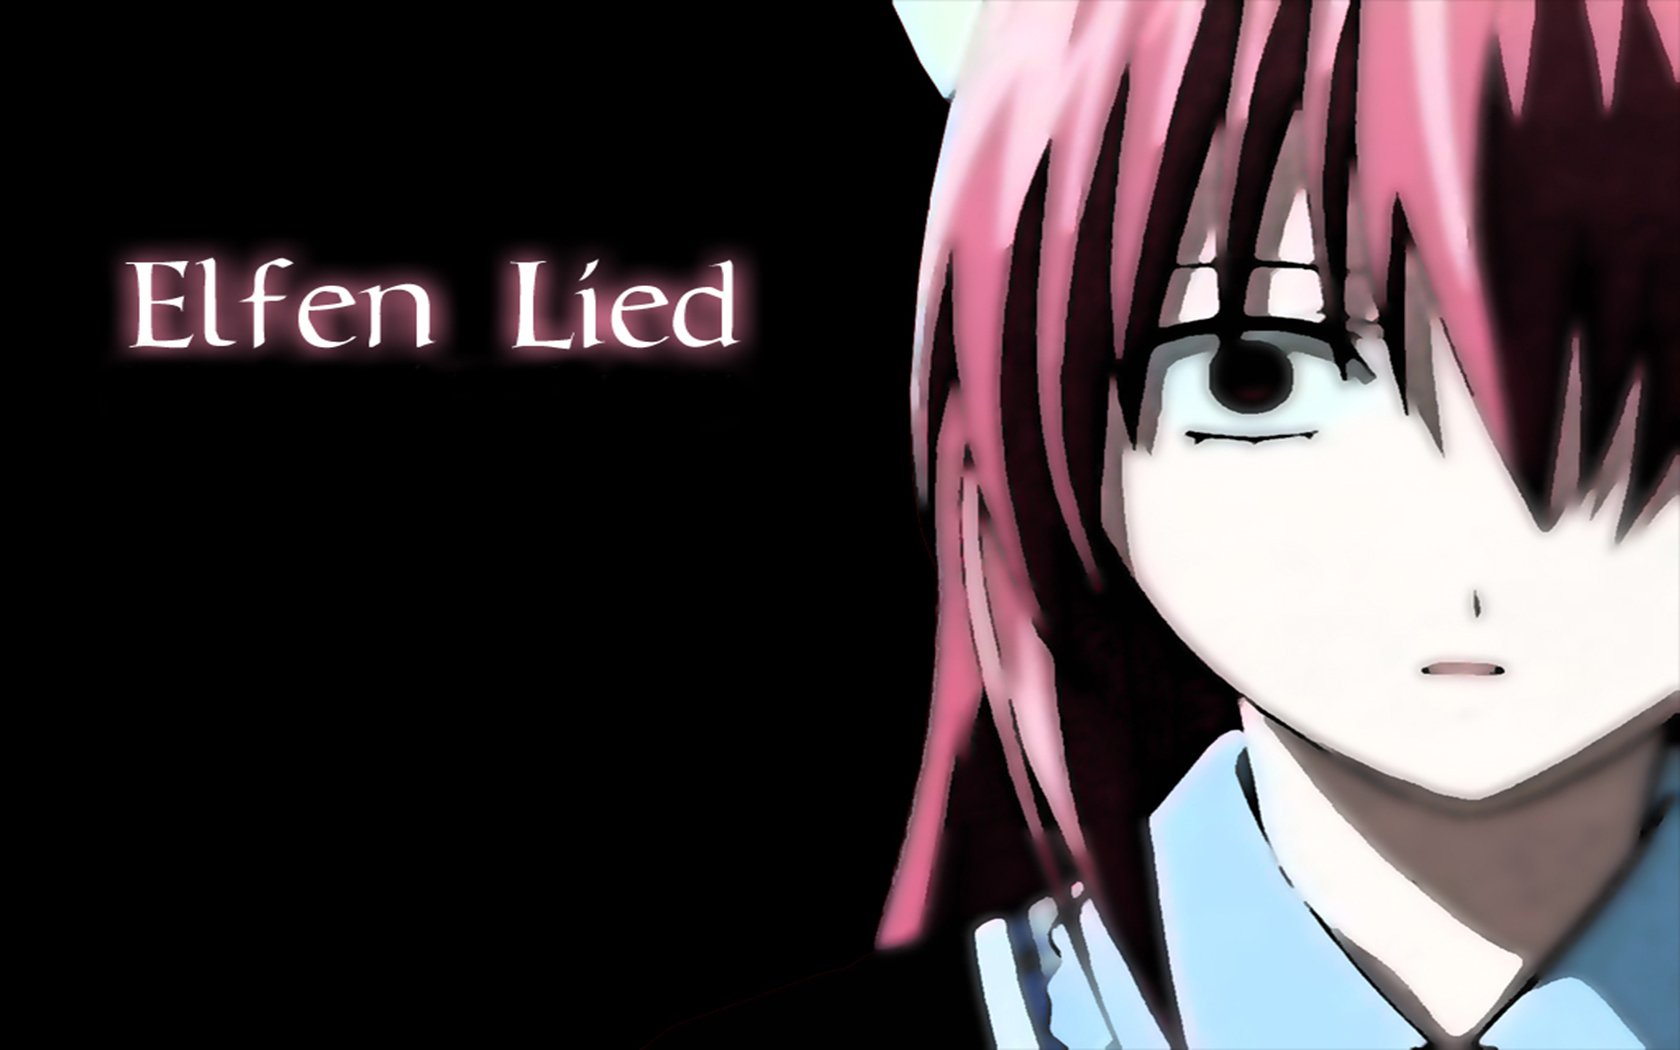 Elfen Lied Wallpaper and Background Image | 1680x1050 | ID:320661